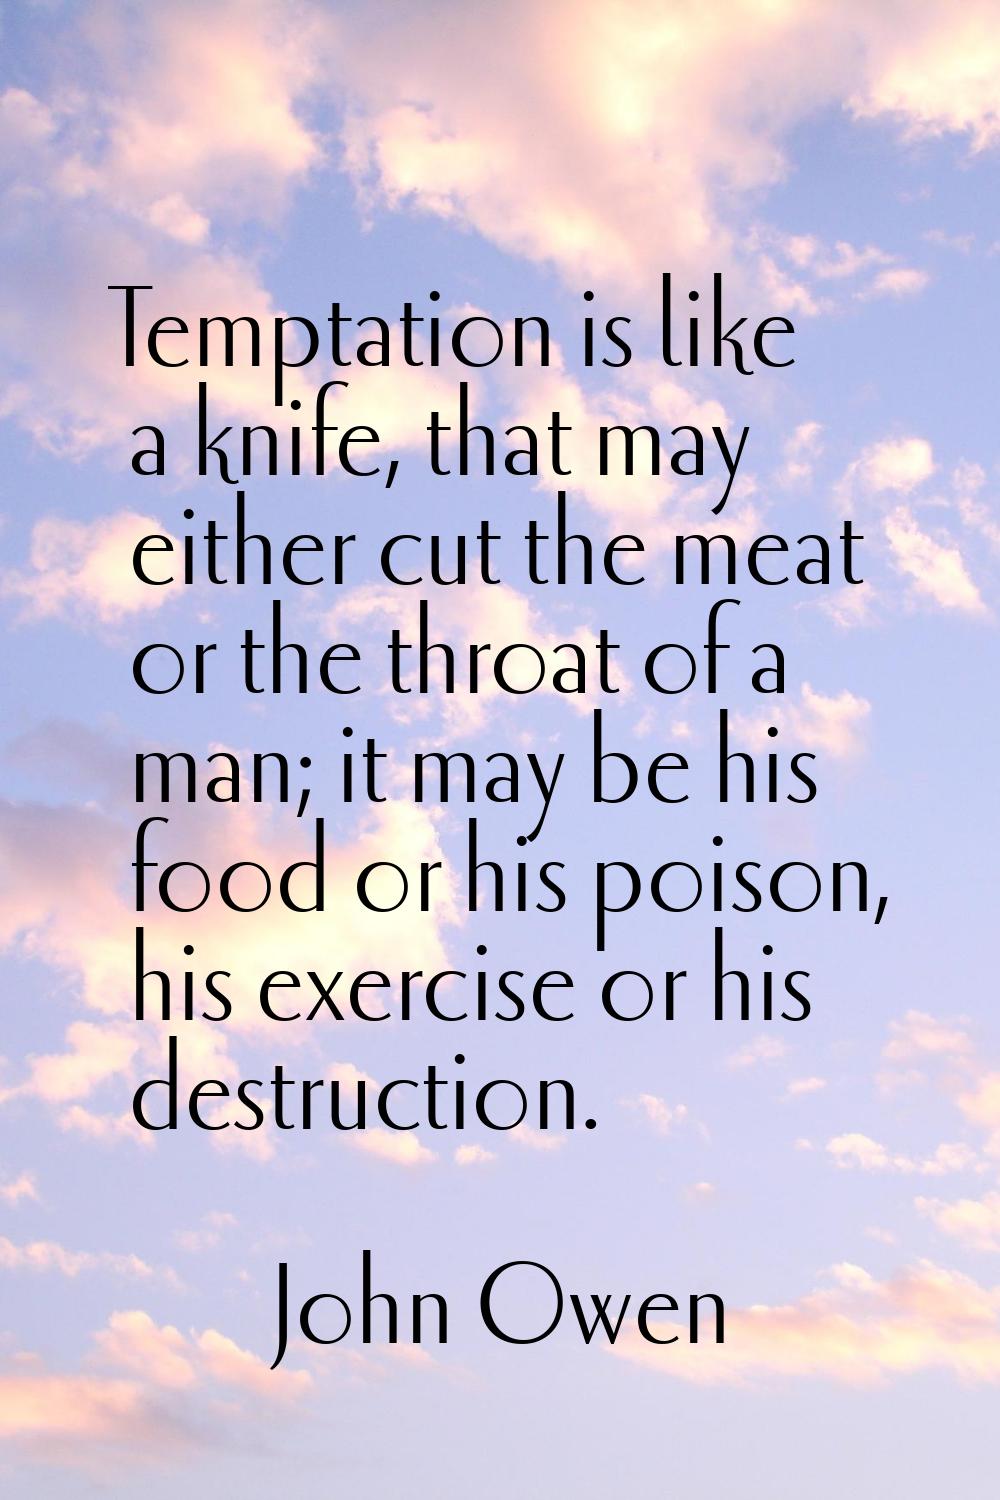 Temptation is like a knife, that may either cut the meat or the throat of a man; it may be his food